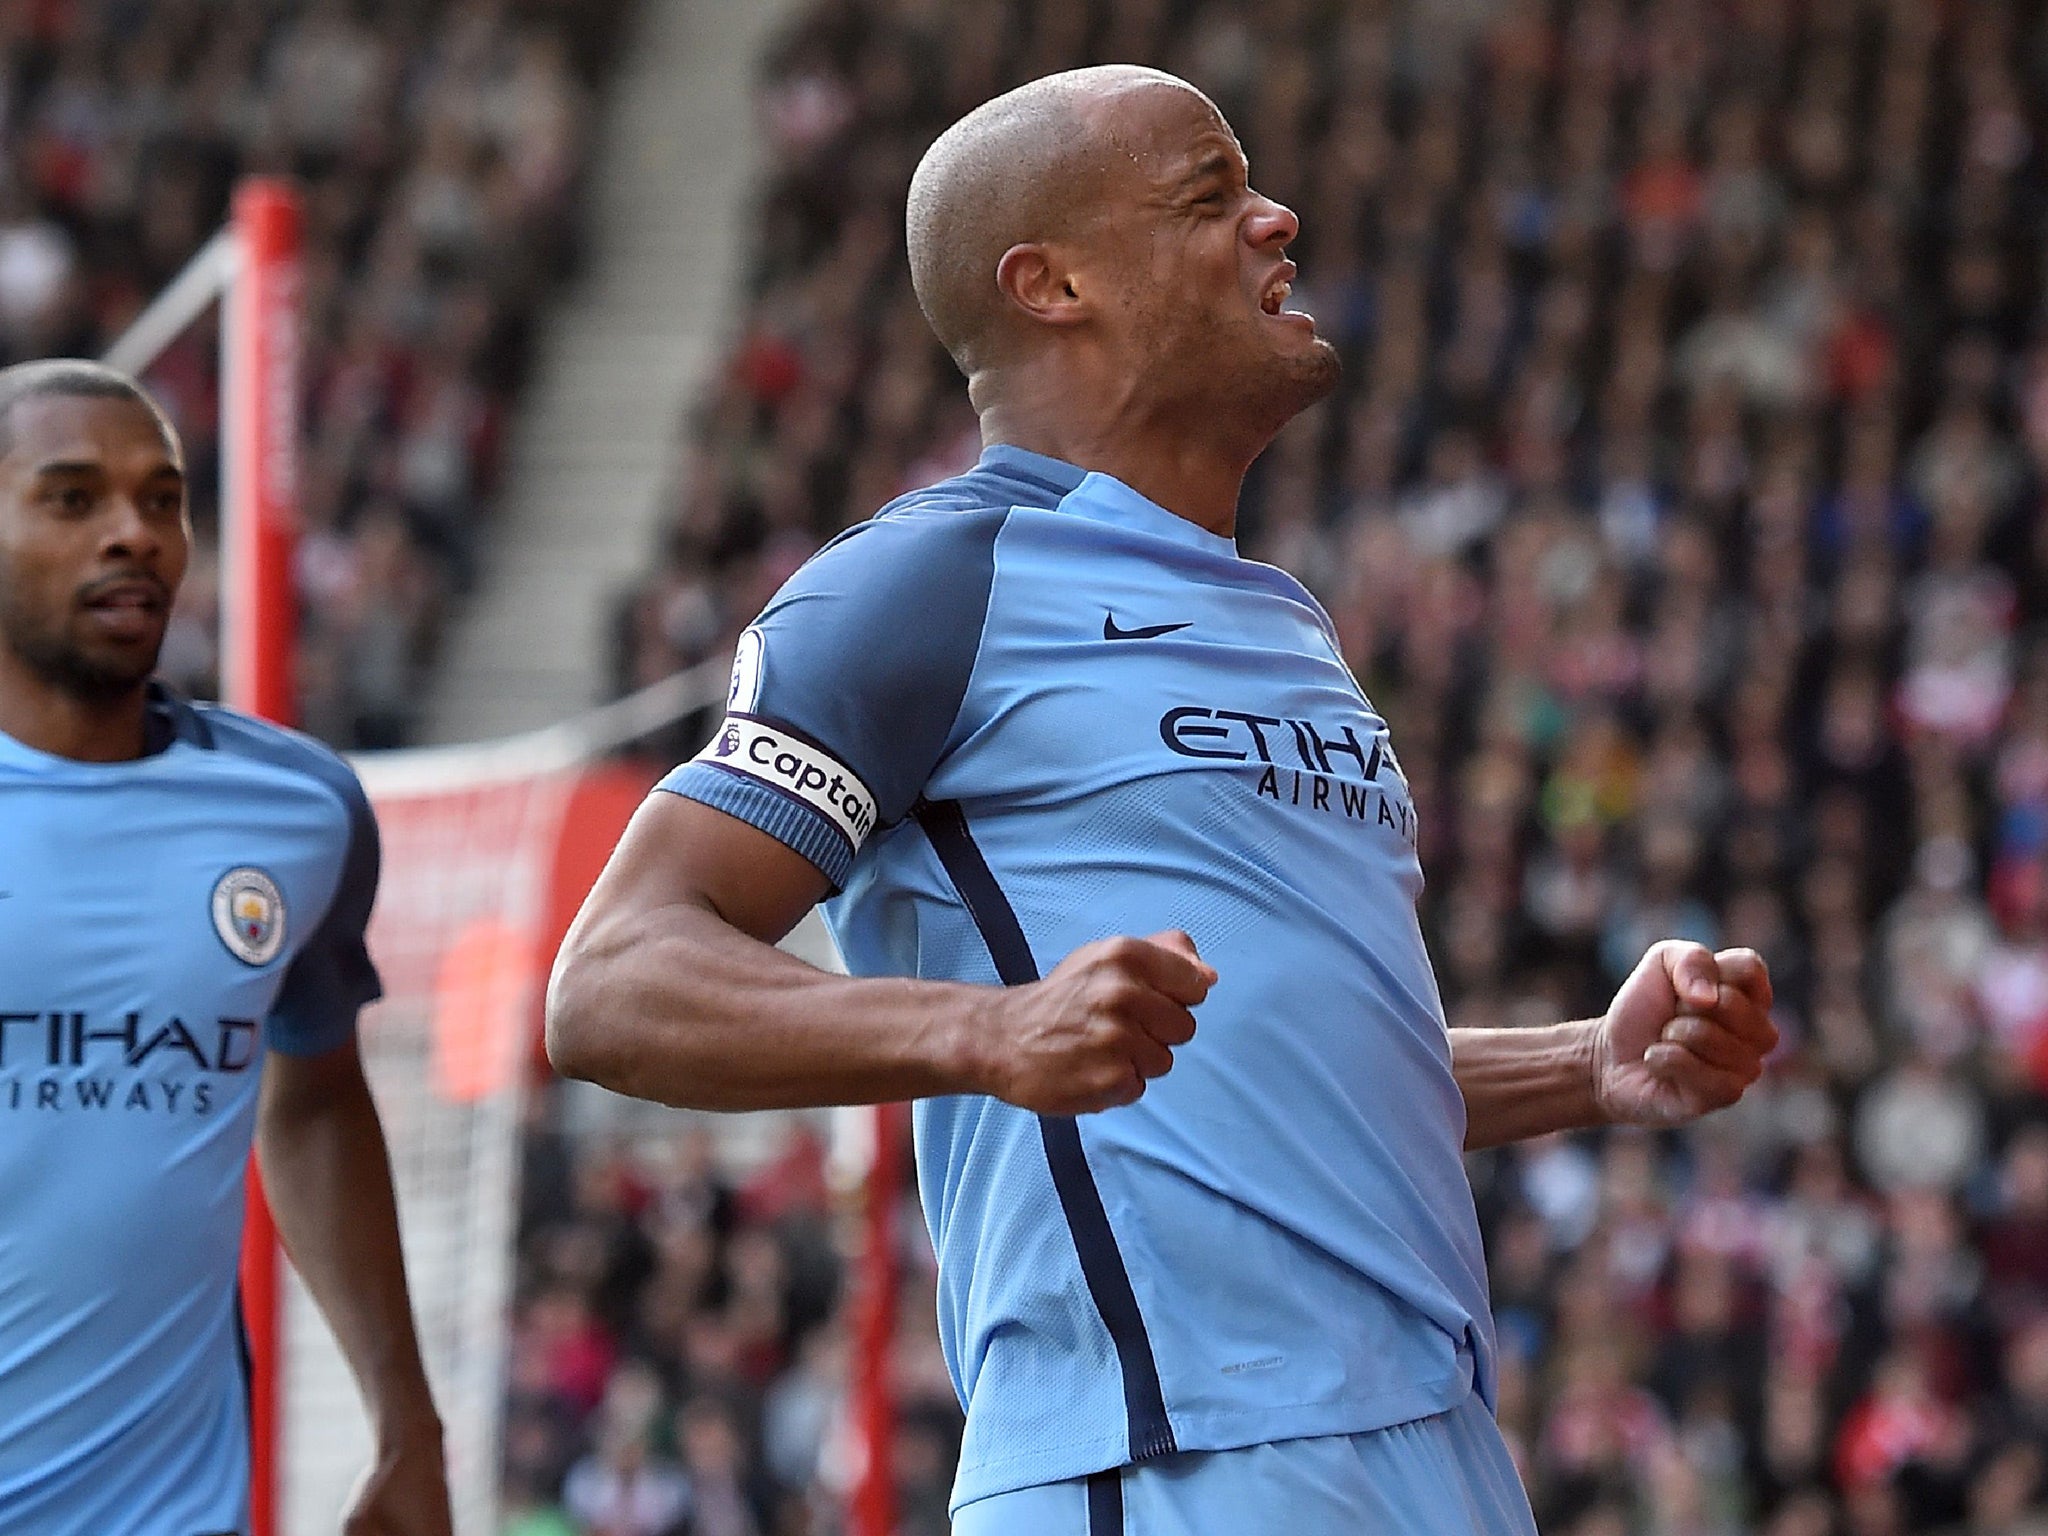 Vincent Kompany could not contain his delight after scoring his first goal since 2015